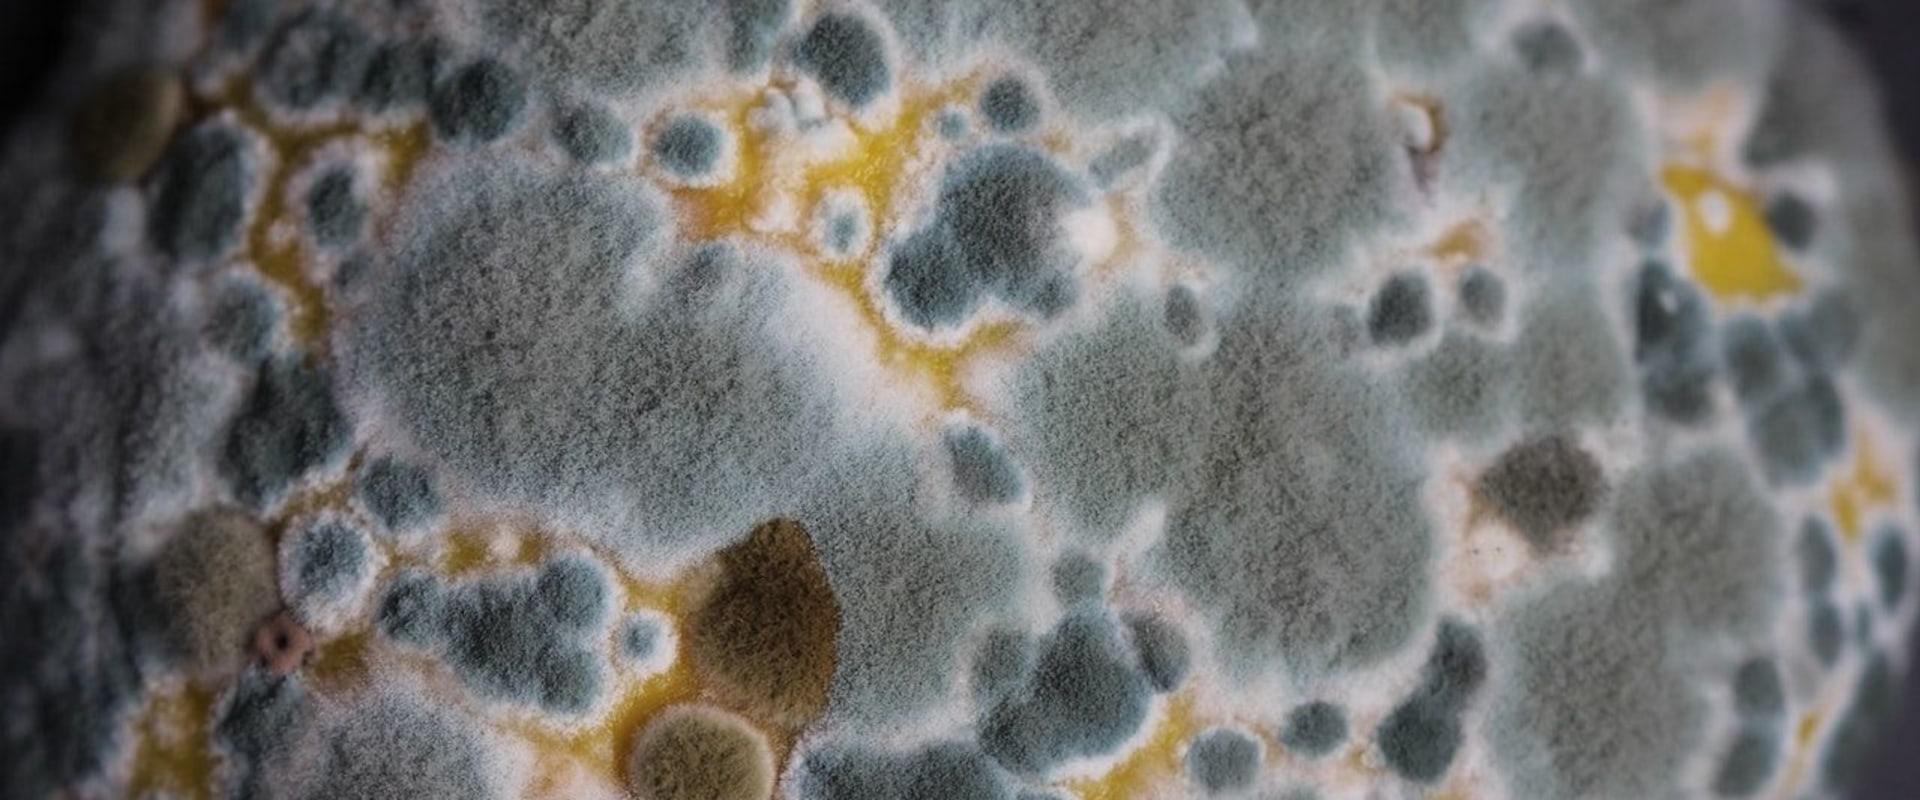 How long does it take for mold exposure to go away?